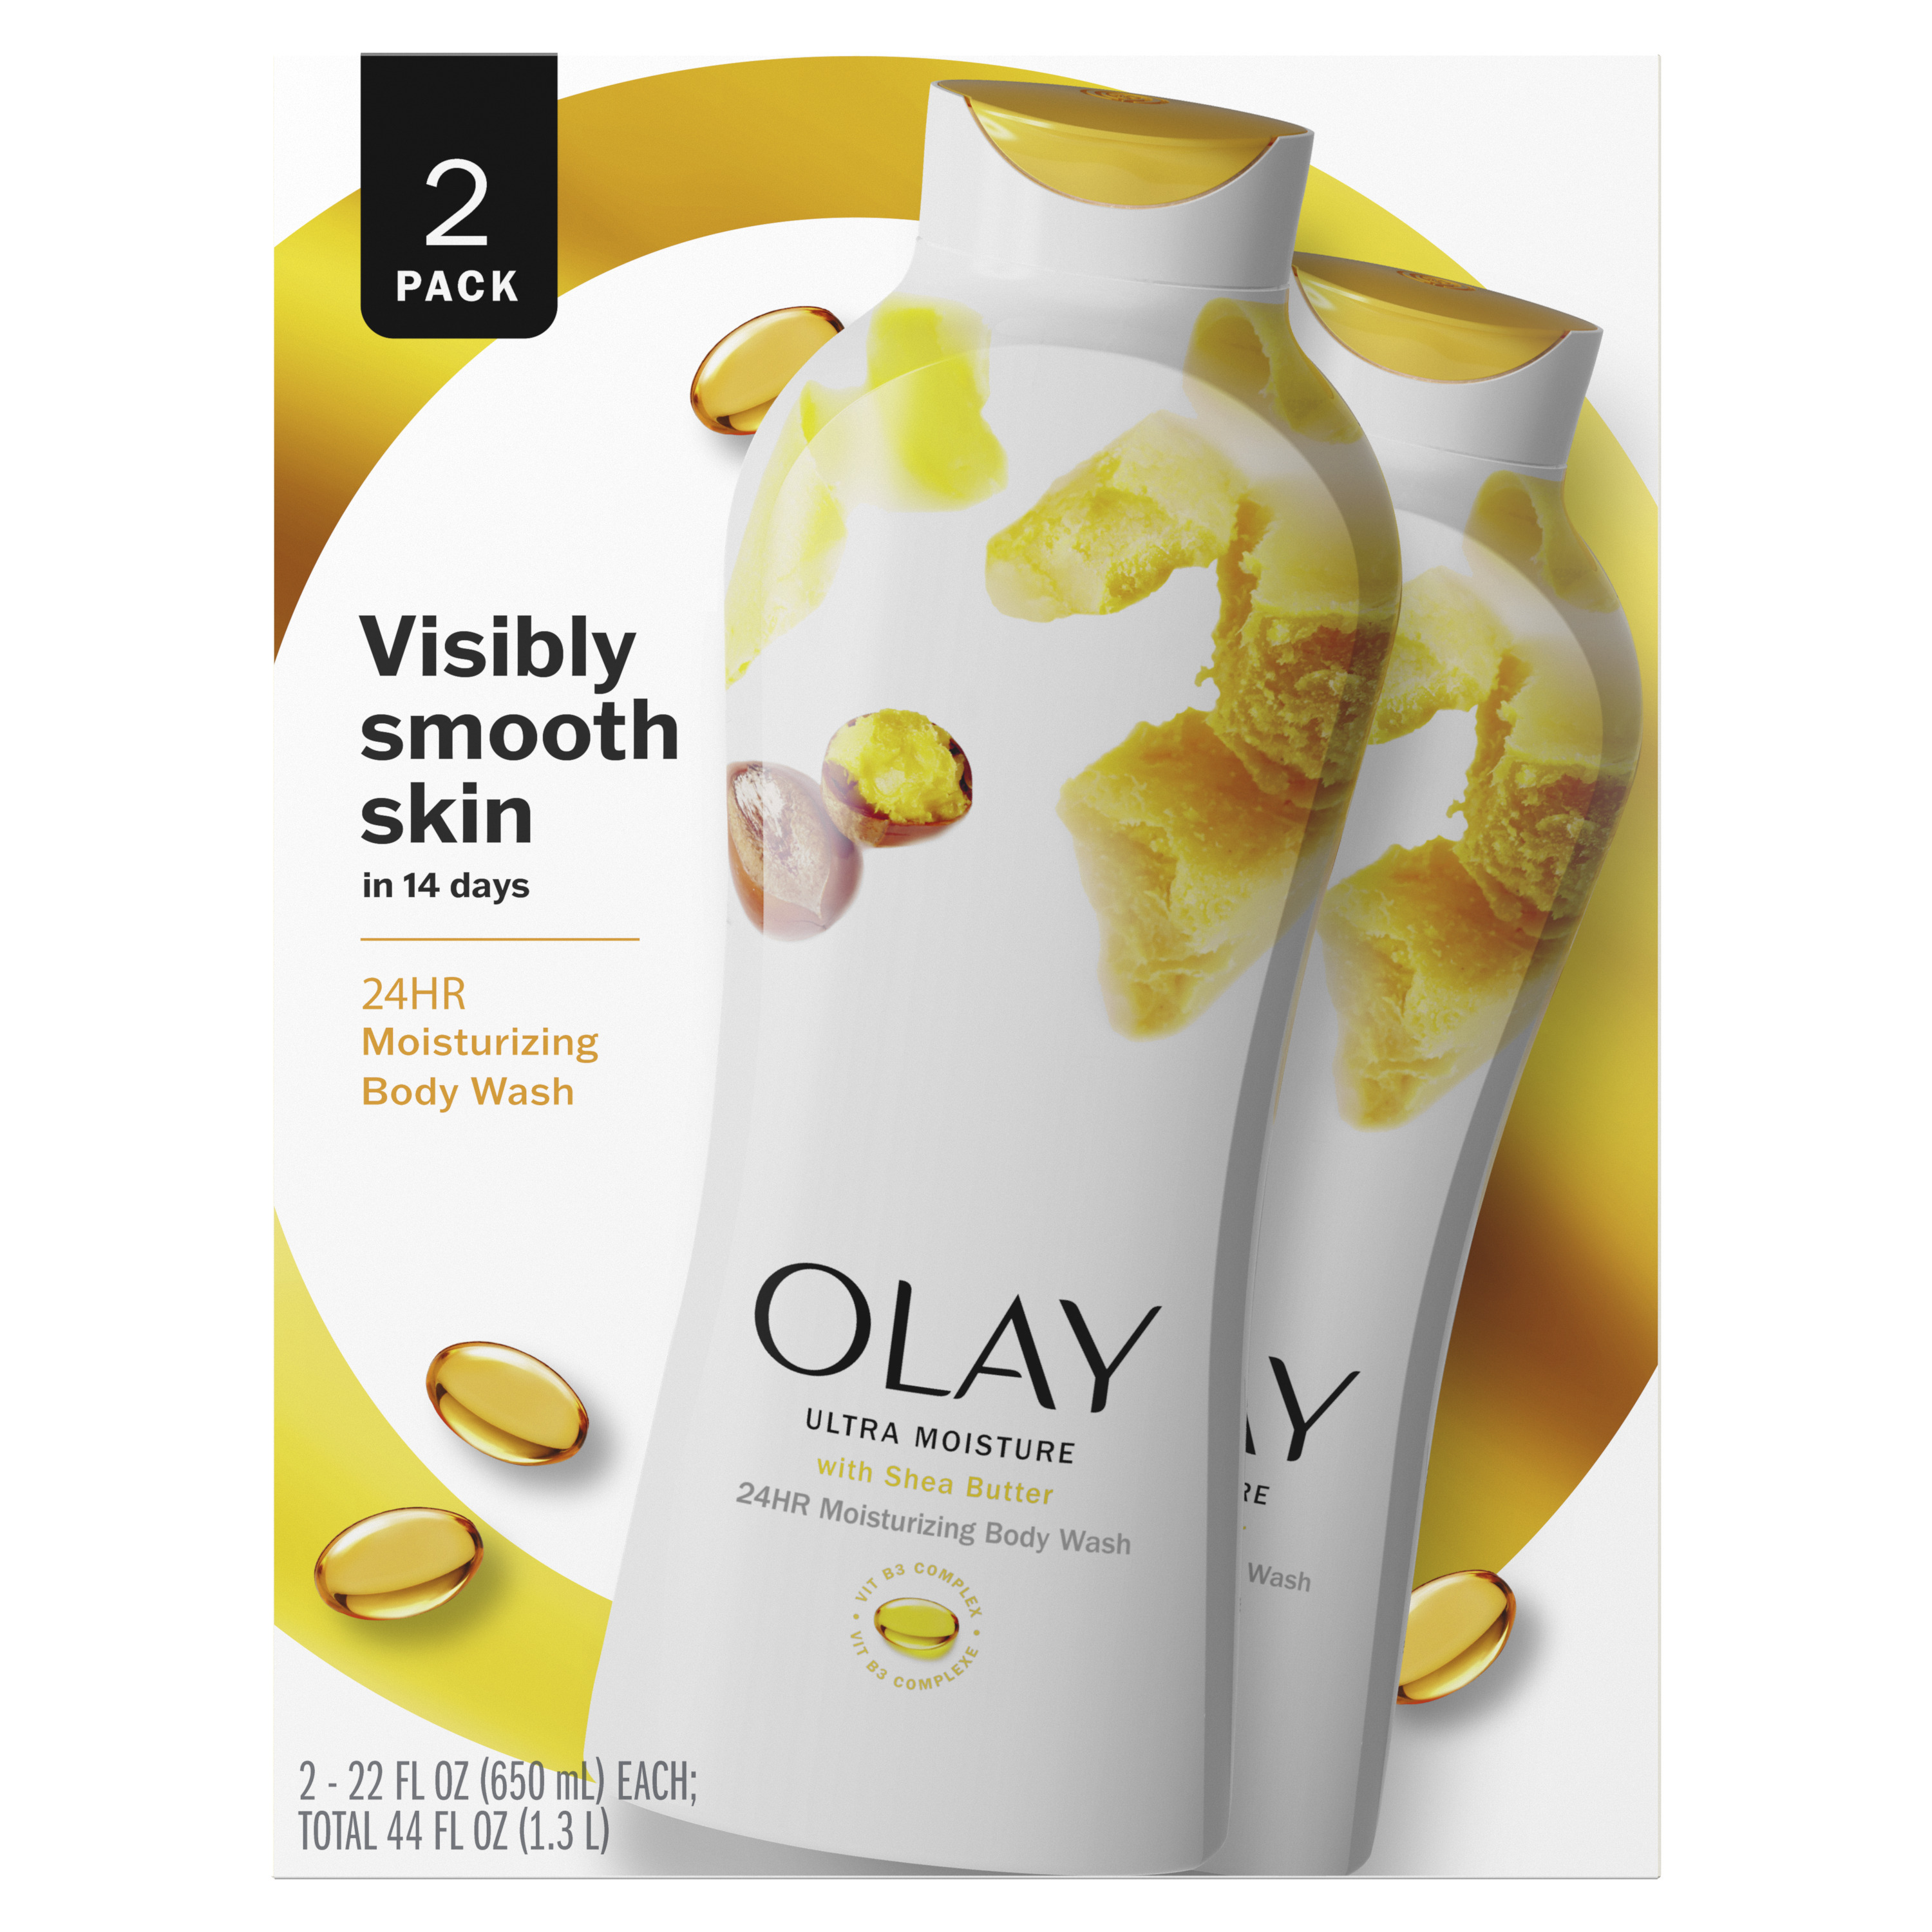 Olay Ultra Moisture Body Wash with Shea Butter, 22 fl oz, Pack of 2 - image 2 of 8